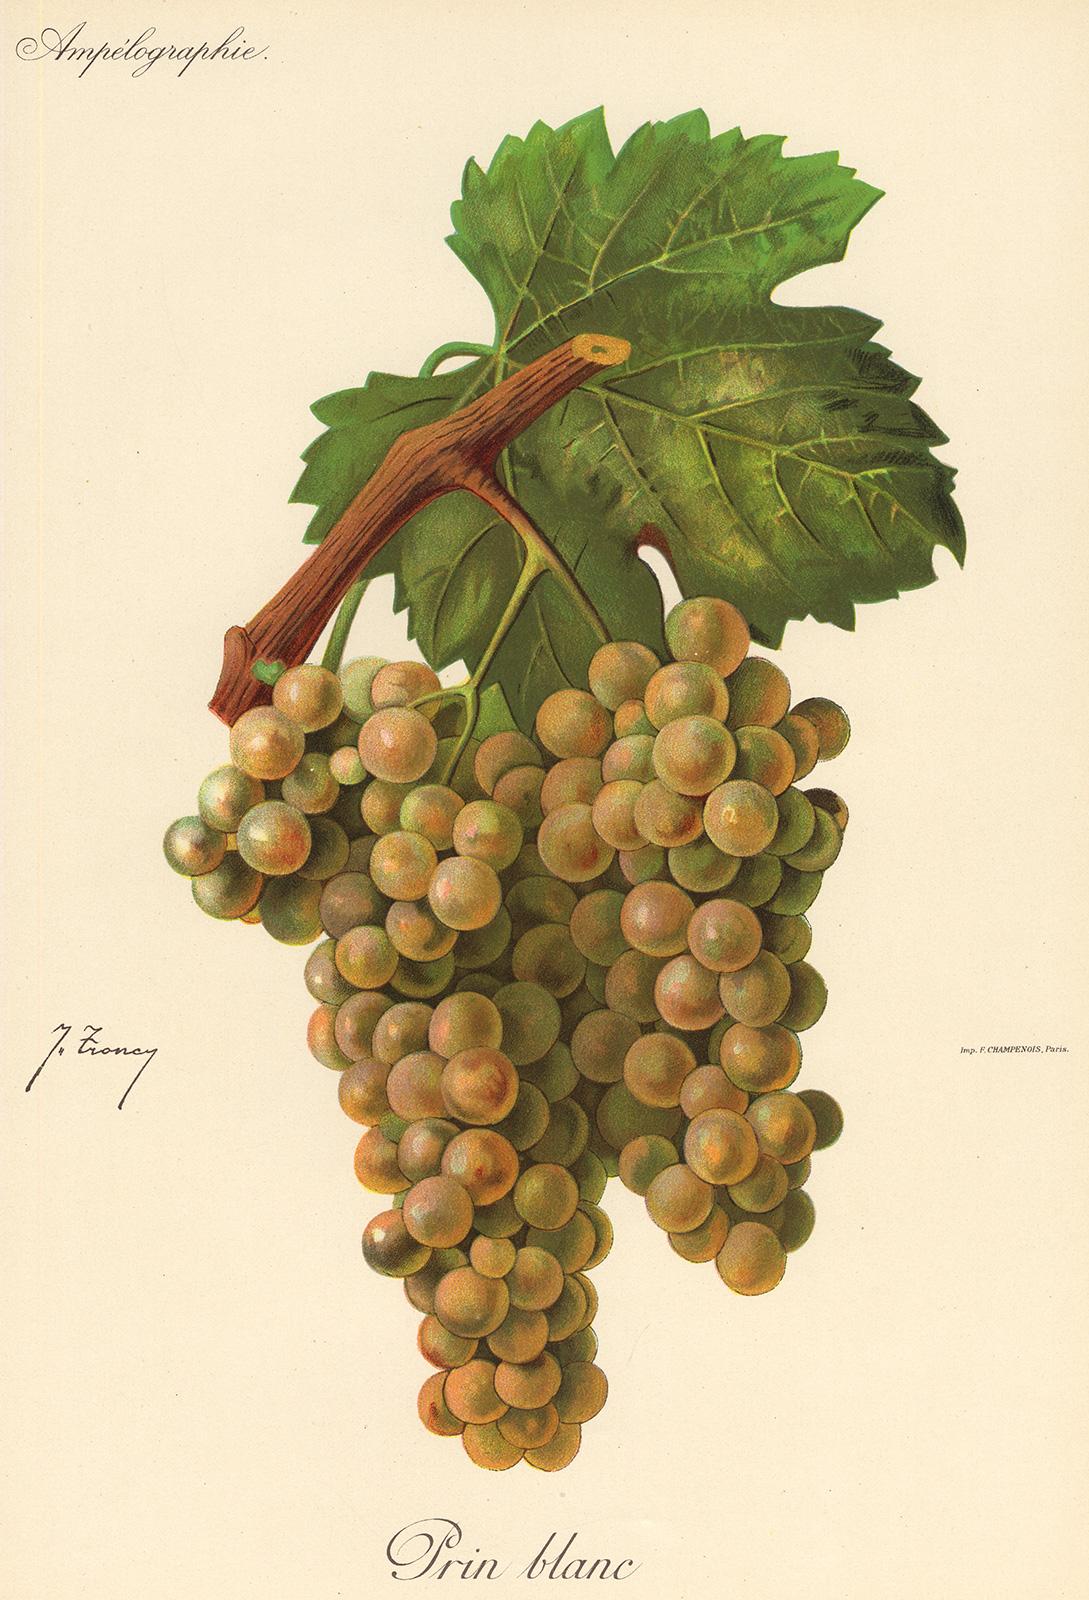 Victor Vermorel Print - The Prin Blanc grape - from Ampelography by Vermorel - Lithograph - Early 20th c